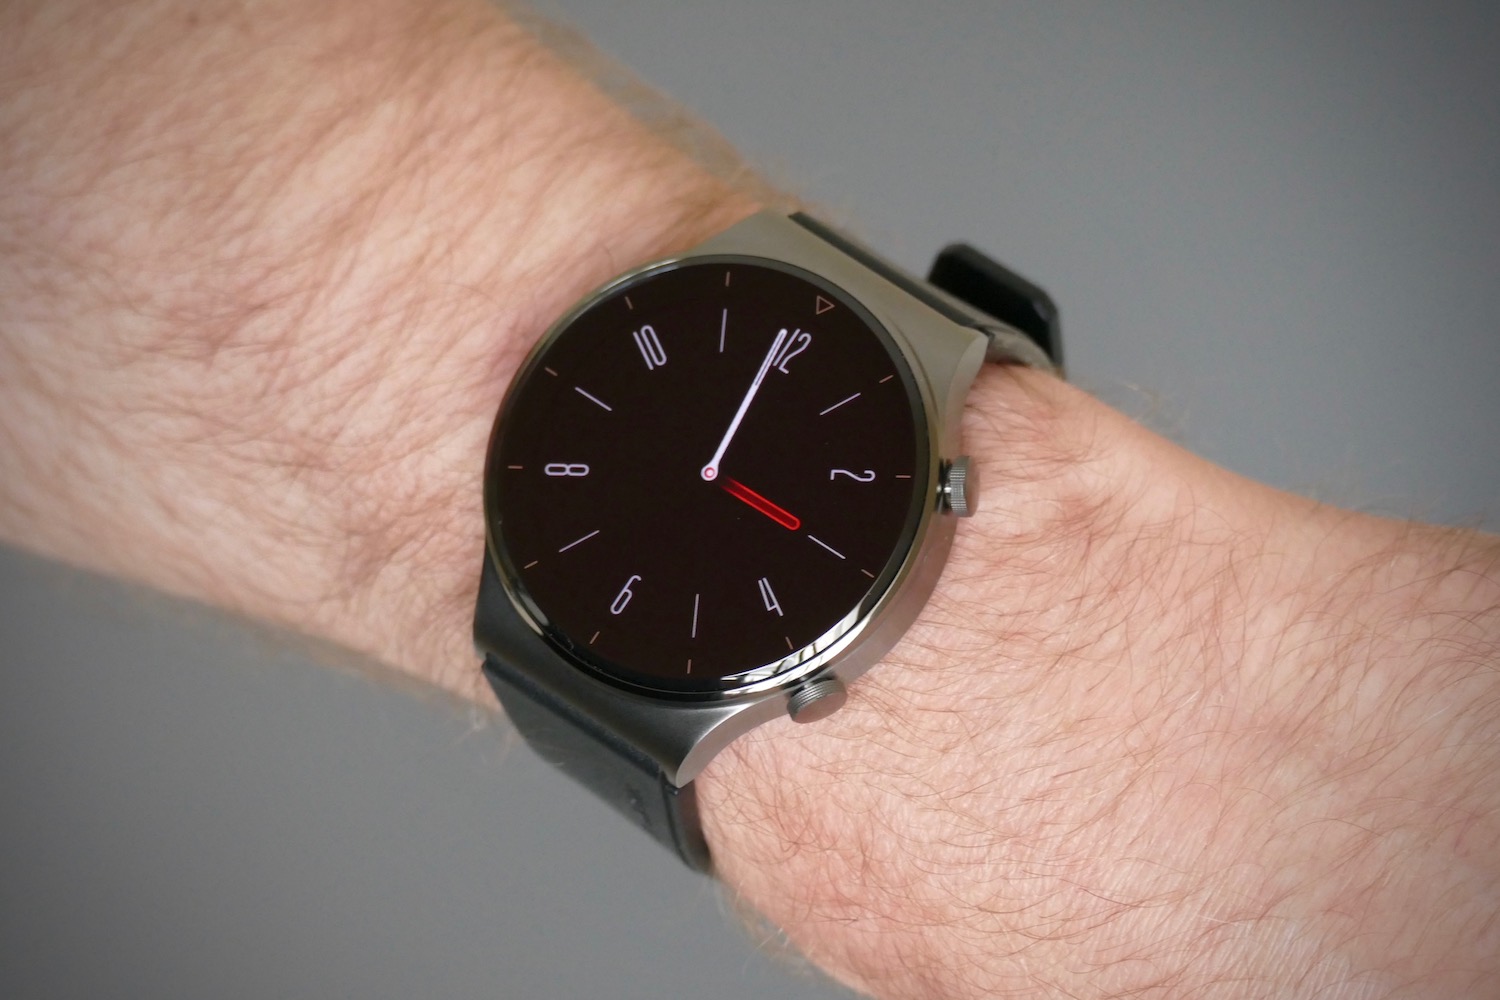 Huawei Watch GT2 Hands-on Review: Classy, But Hamstrung